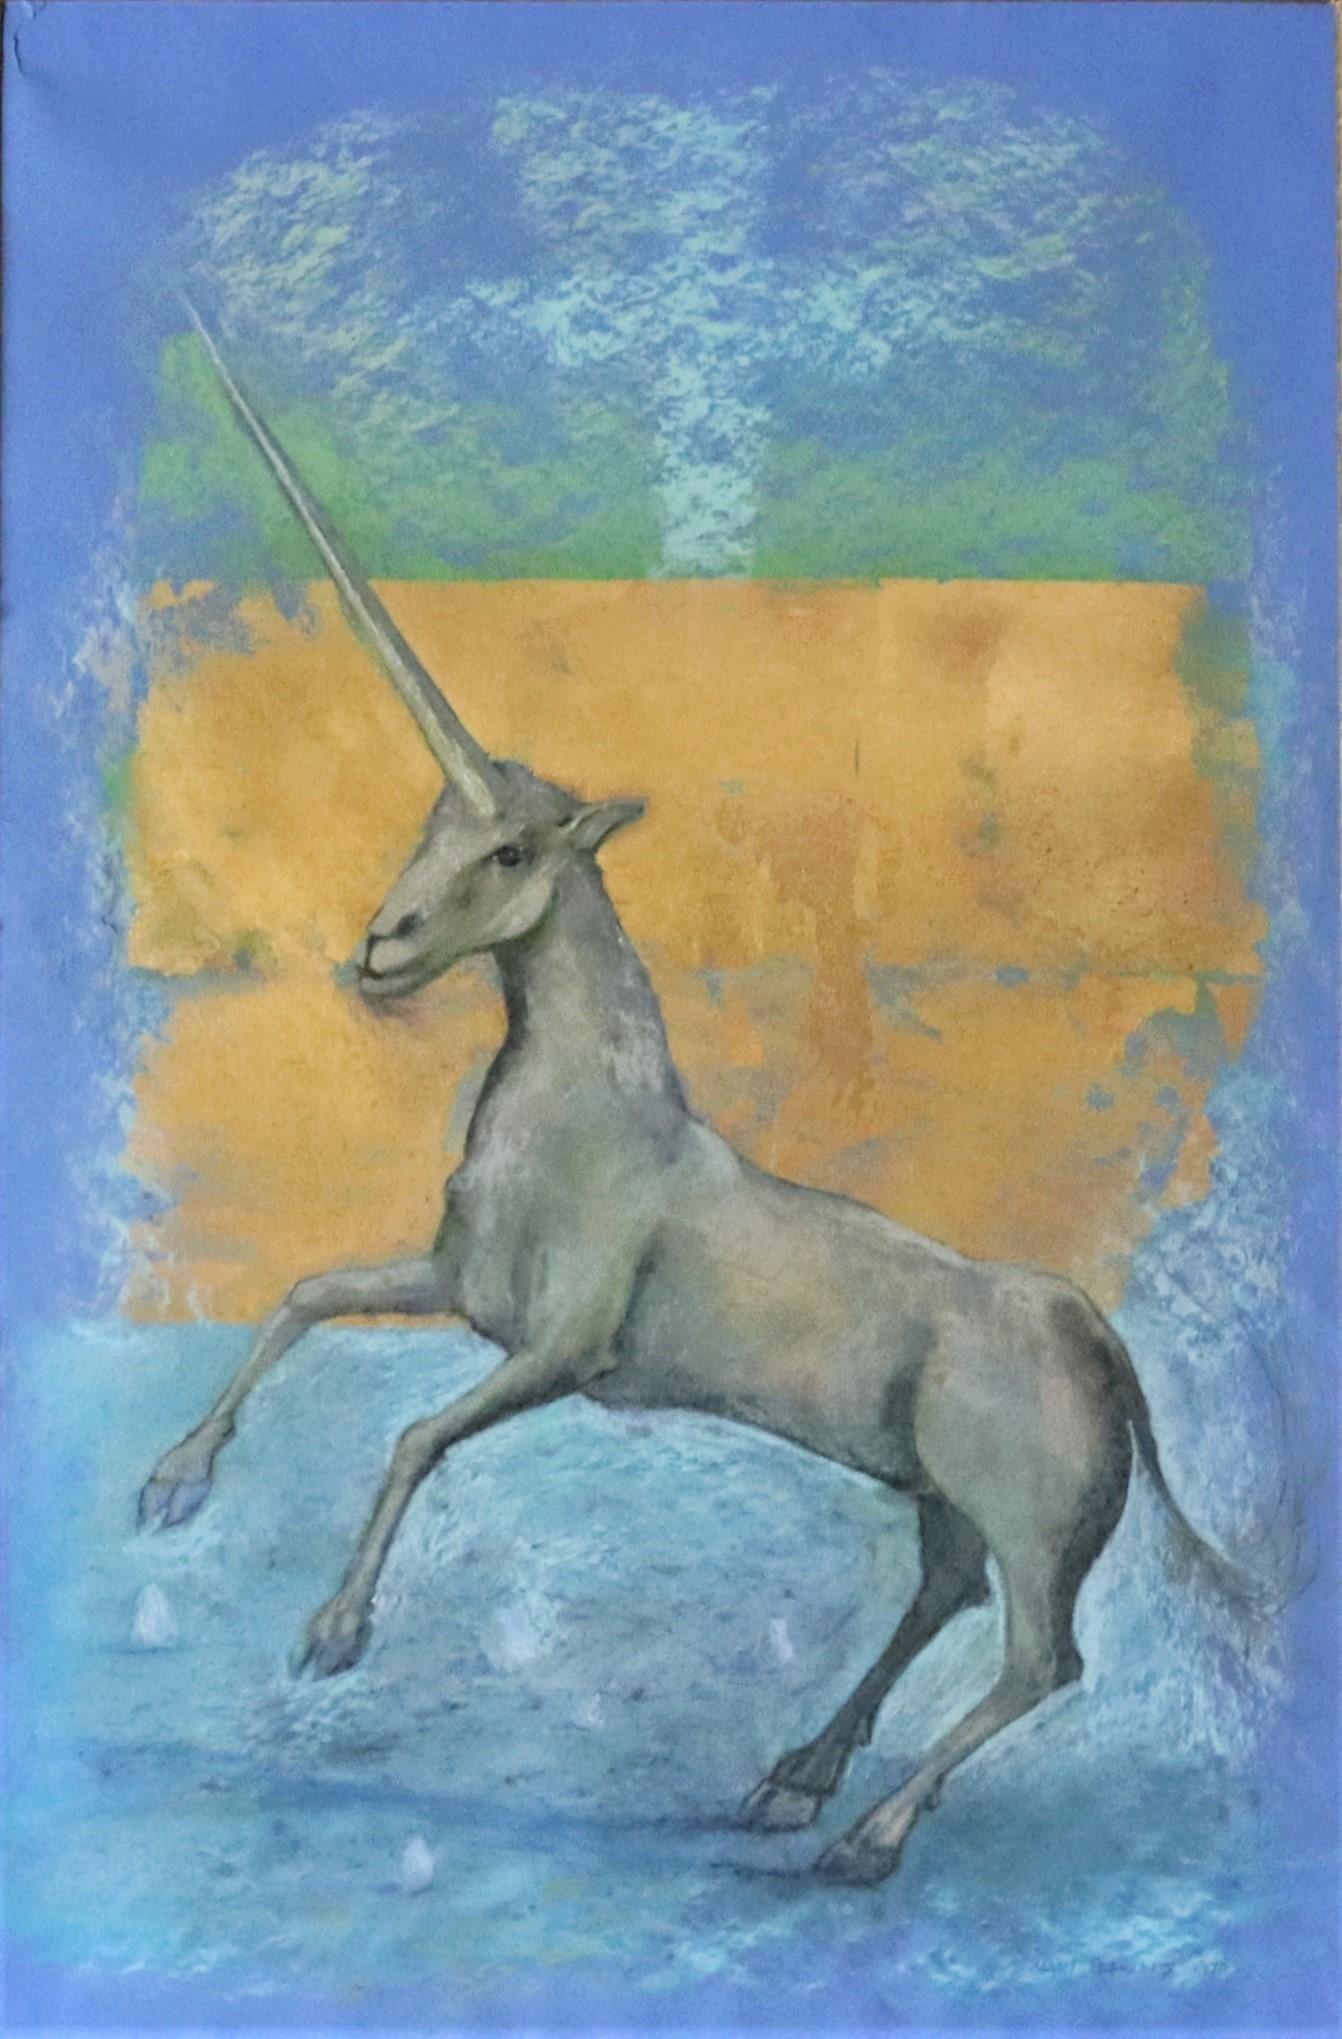 Unicorn with a Golden Wall - Mixed Media Art by Kelly Fearing